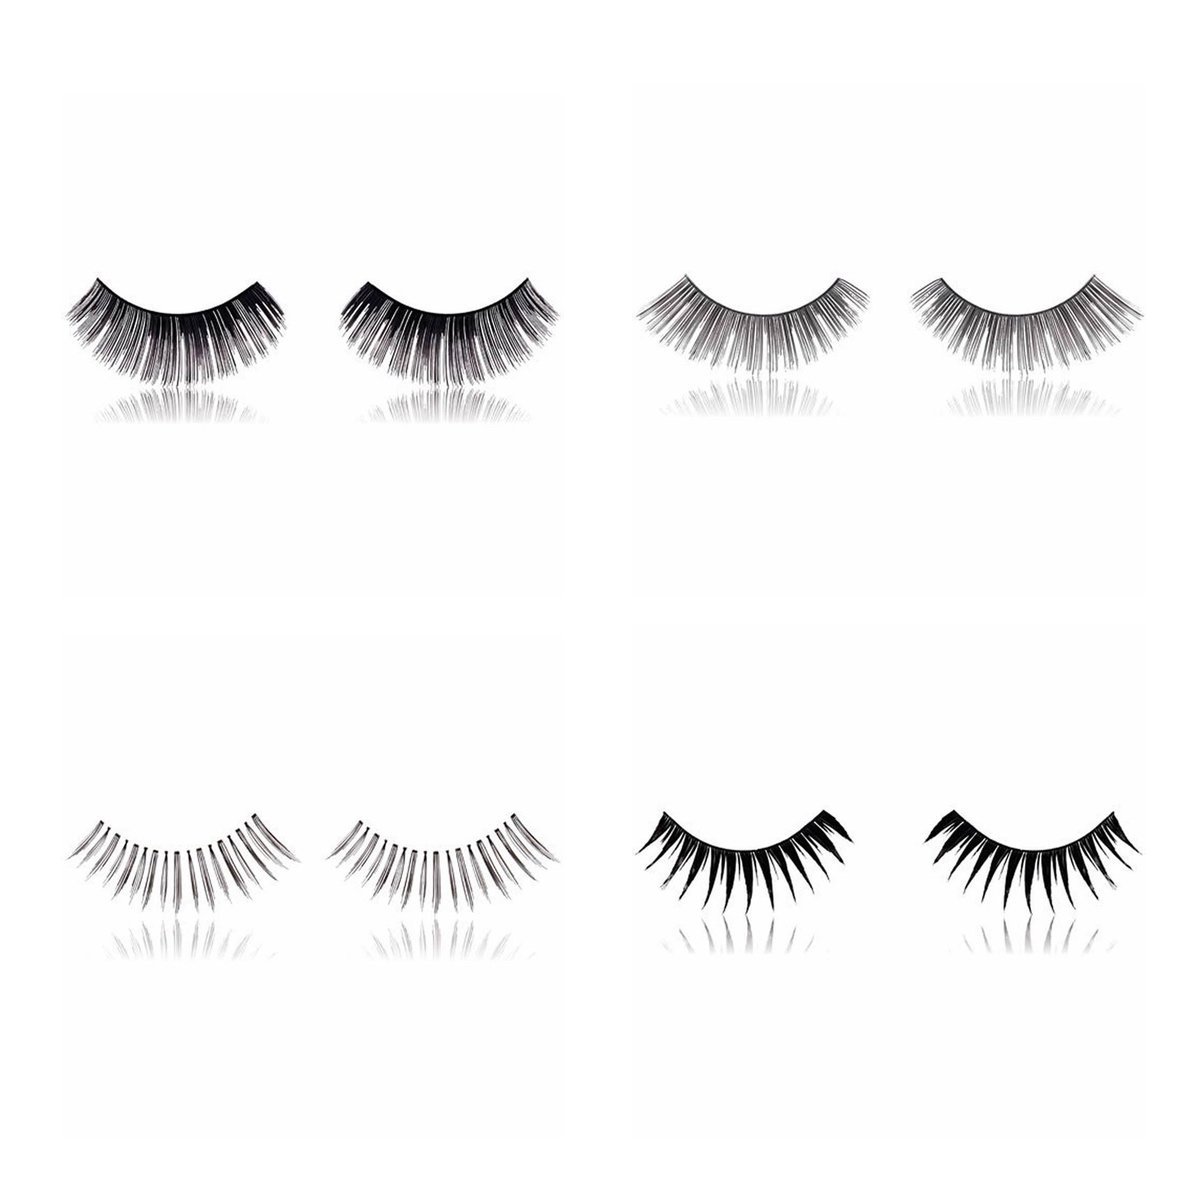 Pack of 4 Lash Strips for Volume, Lengthening or Definition - Beauty Hair Products LtdLashes